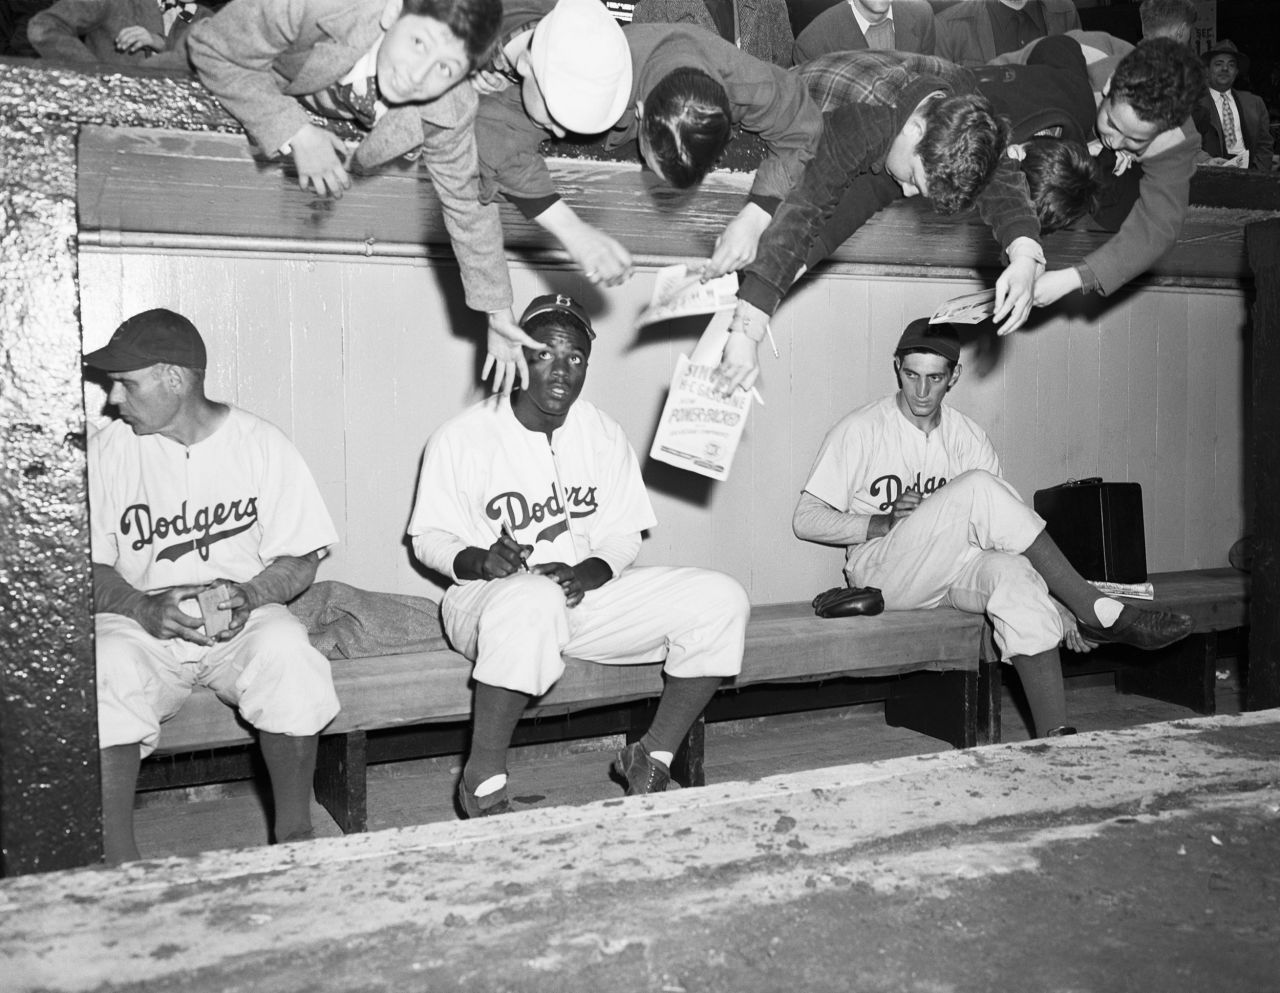 Young Dodger fans reach down to try to get Robinson's autograph during an exhibition game in New York on April 11, 1947.